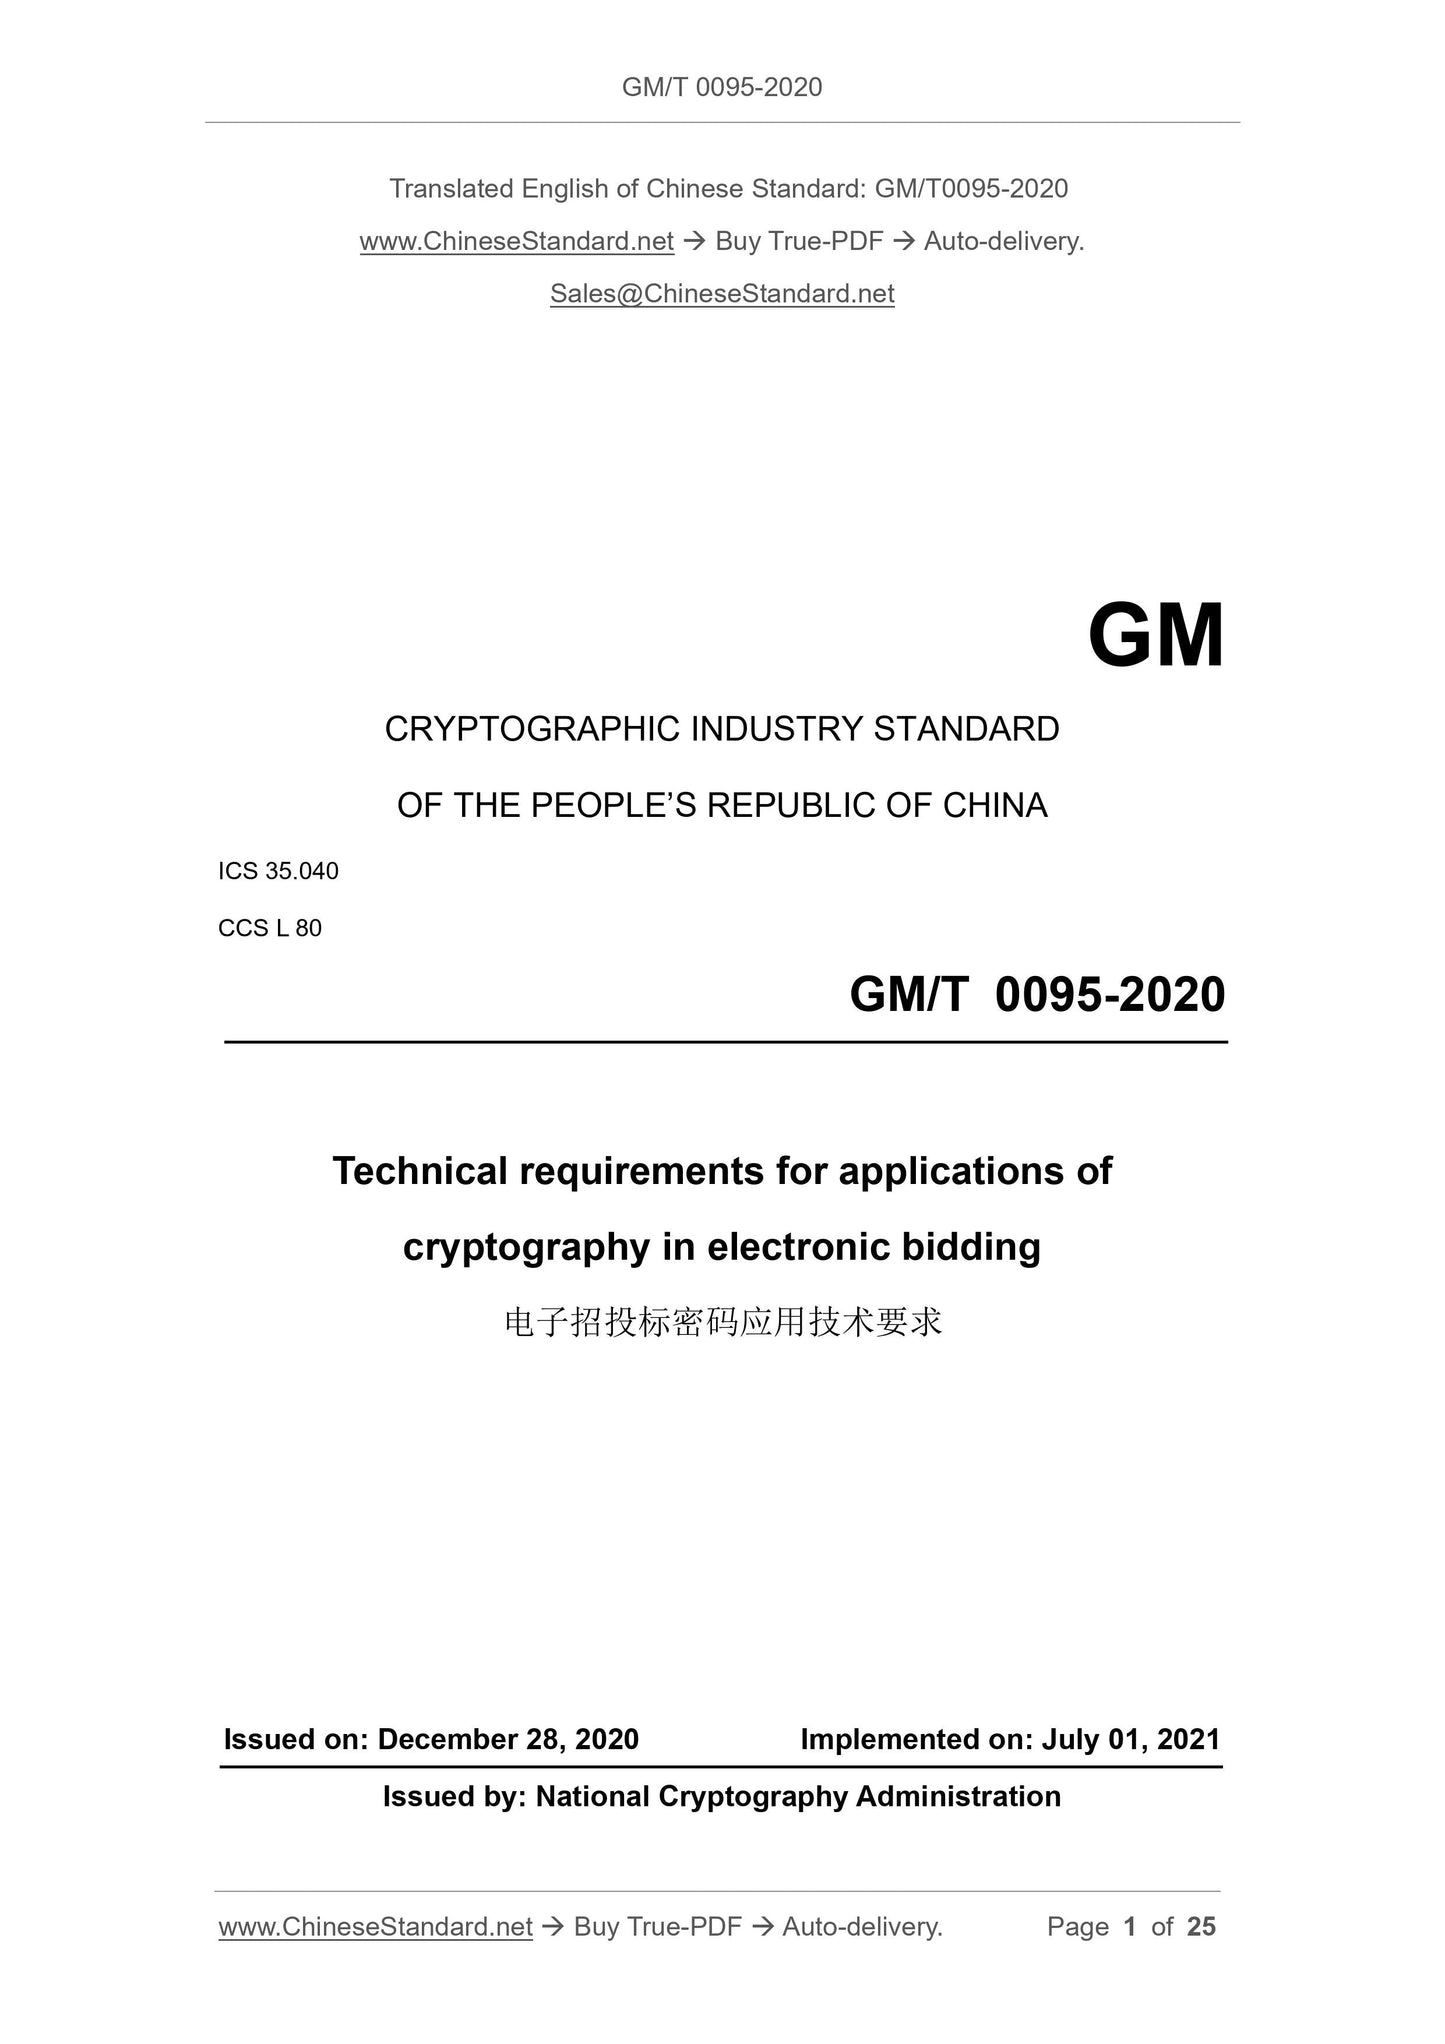 GM/T 0095-2020 Page 1